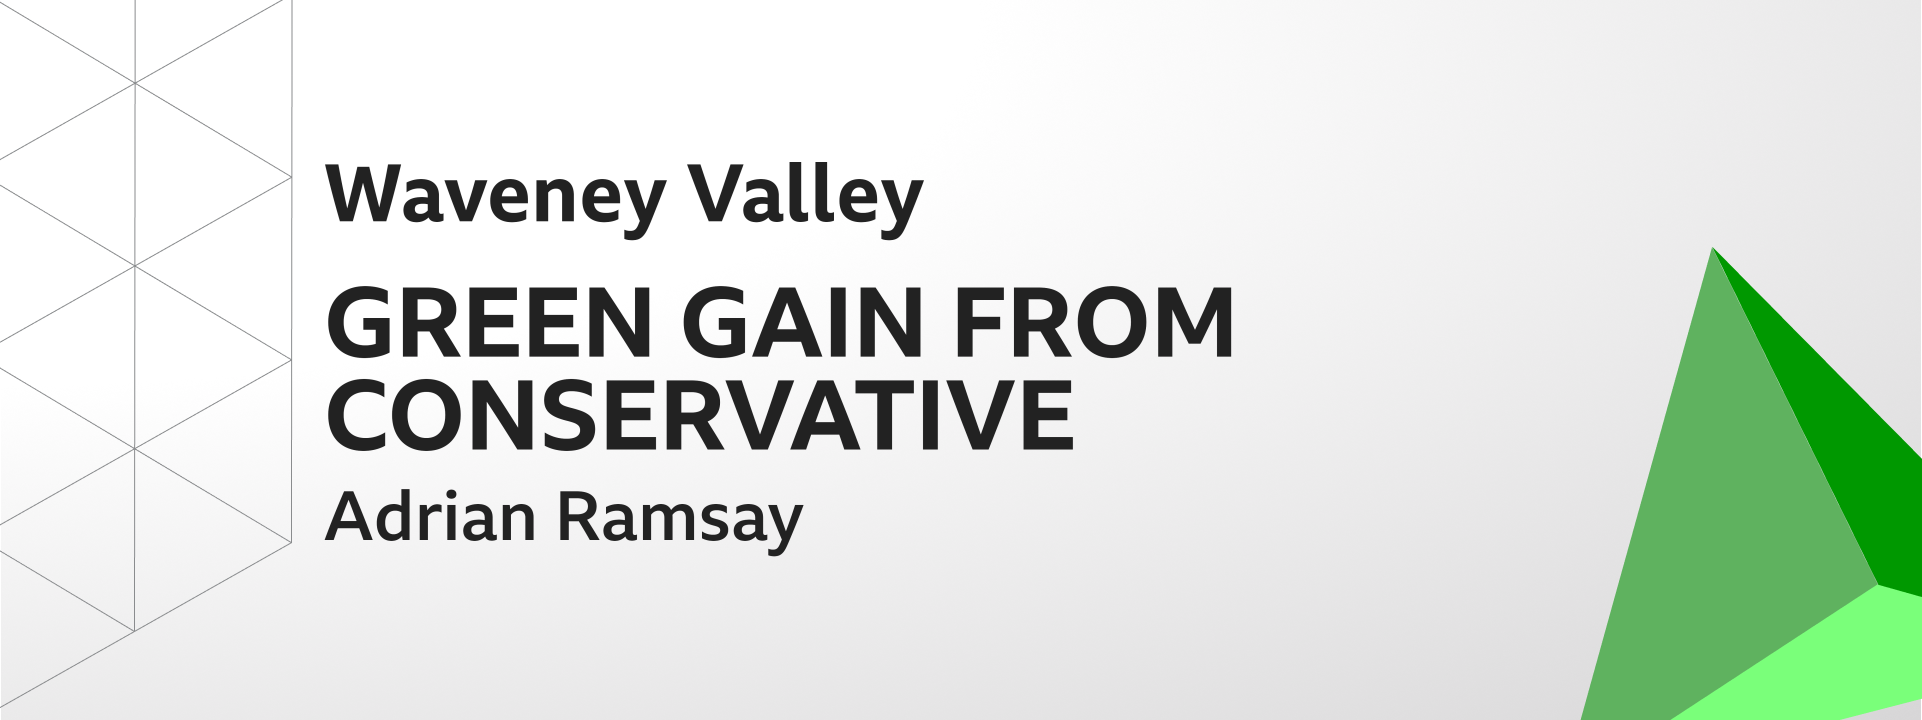 Graphic showing Greens gain Waveney Valley from the Conservatives. The winning candidate was Adrian Ramsay.